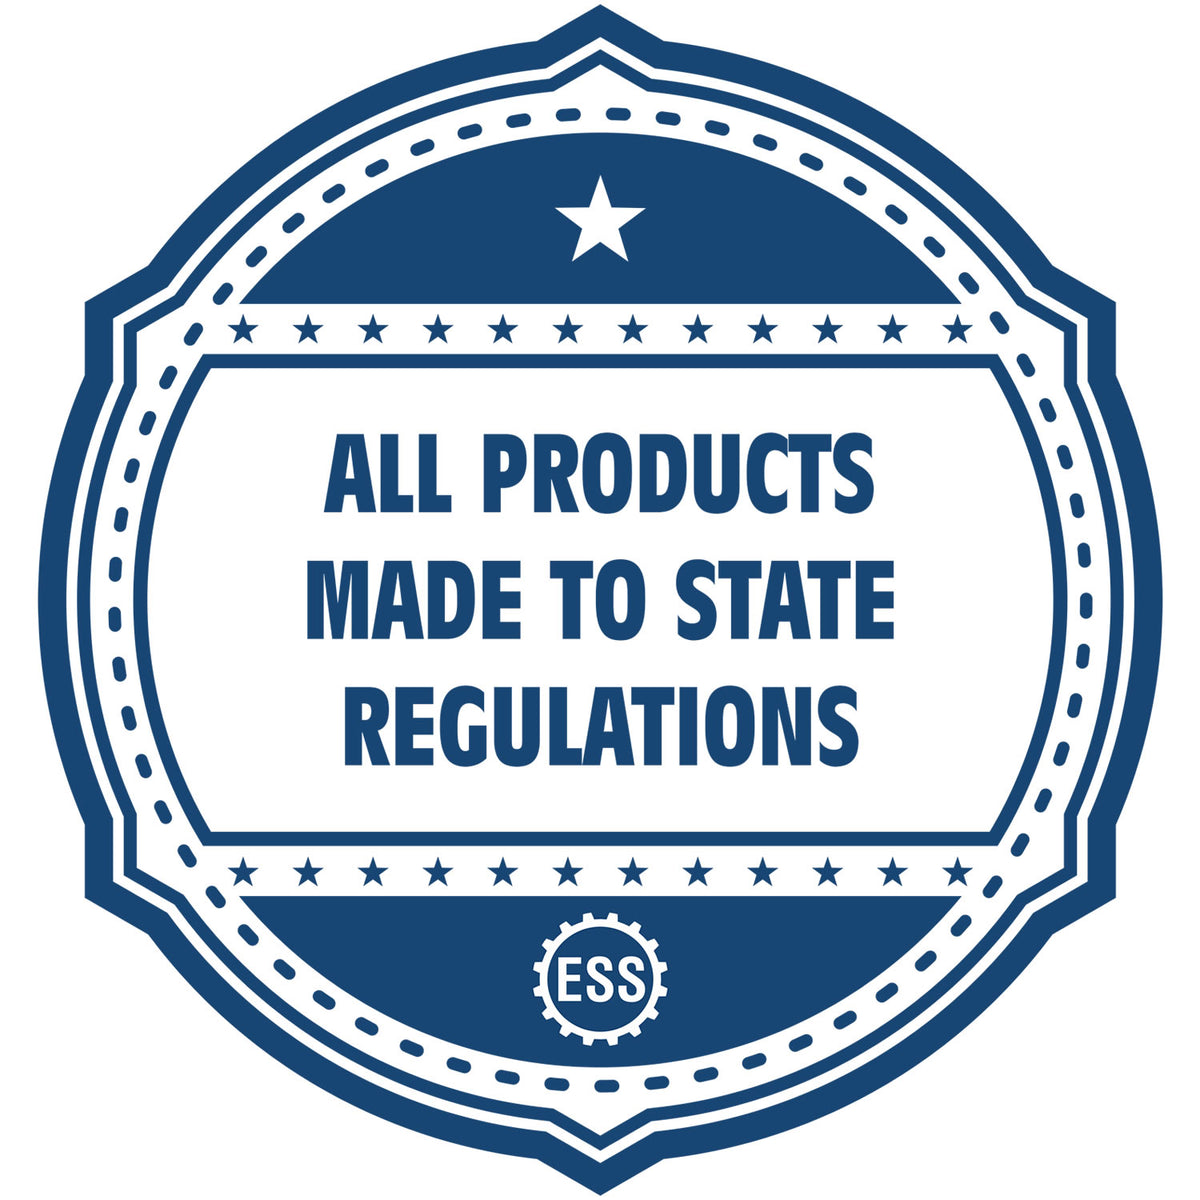 An icon or badge element for the Heavy Duty Cast Iron Maine Engineer Seal Embosser showing that this product is made in compliance with state regulations.